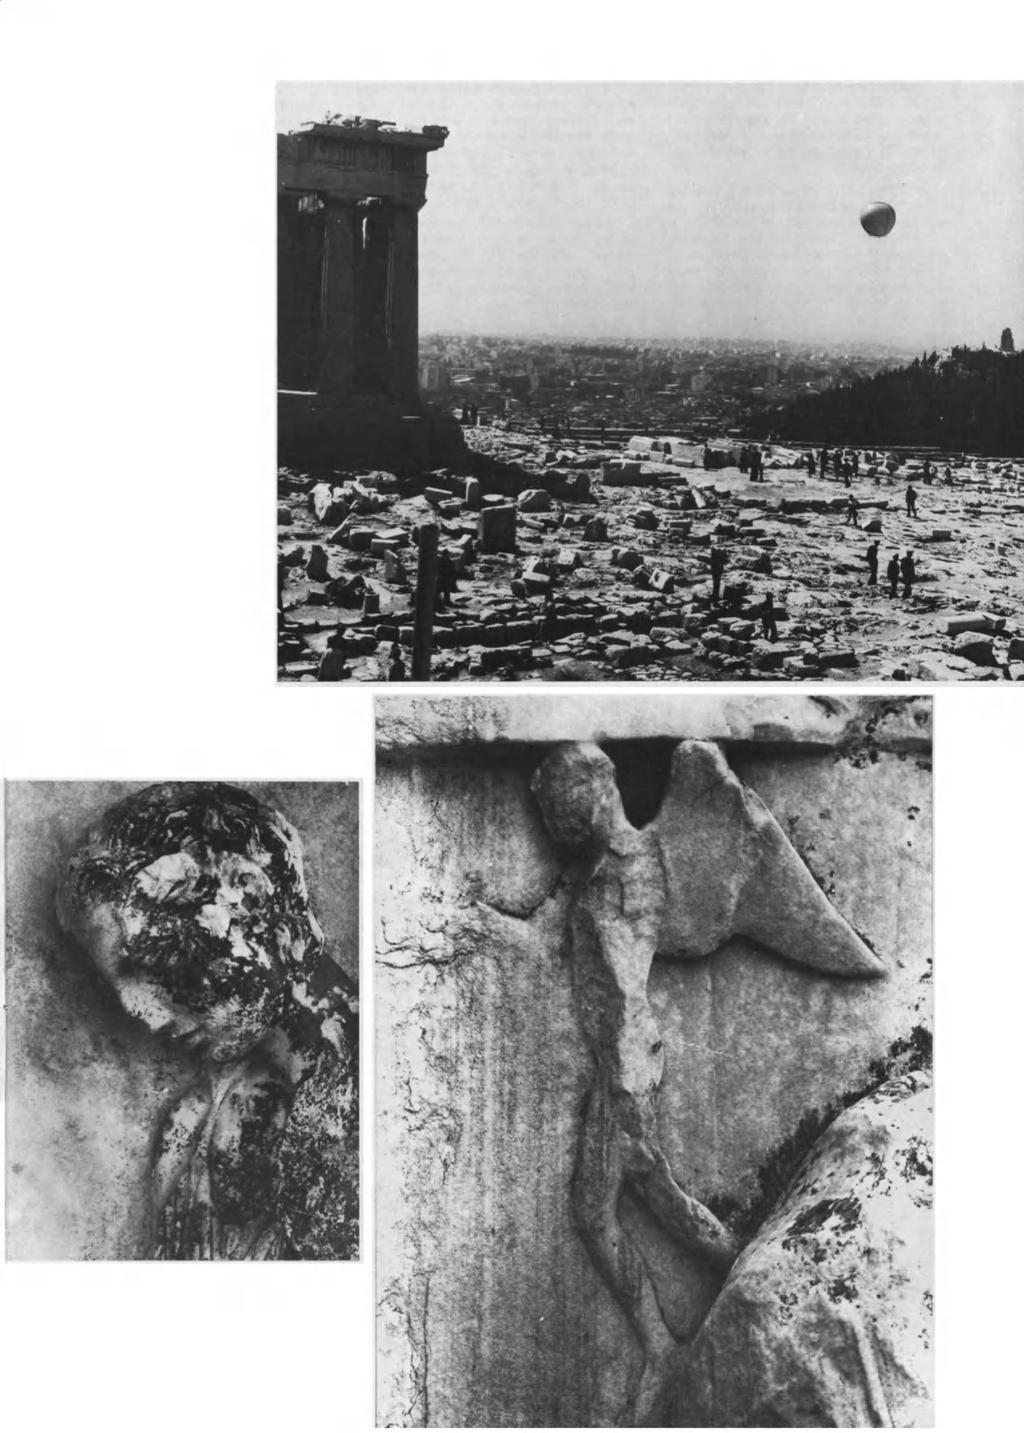 Ballooning Photo Antiquities Department of the Acropolis, Athens to the rescue Balloon approaches the Acropolis (right) on a picture-taking mission.